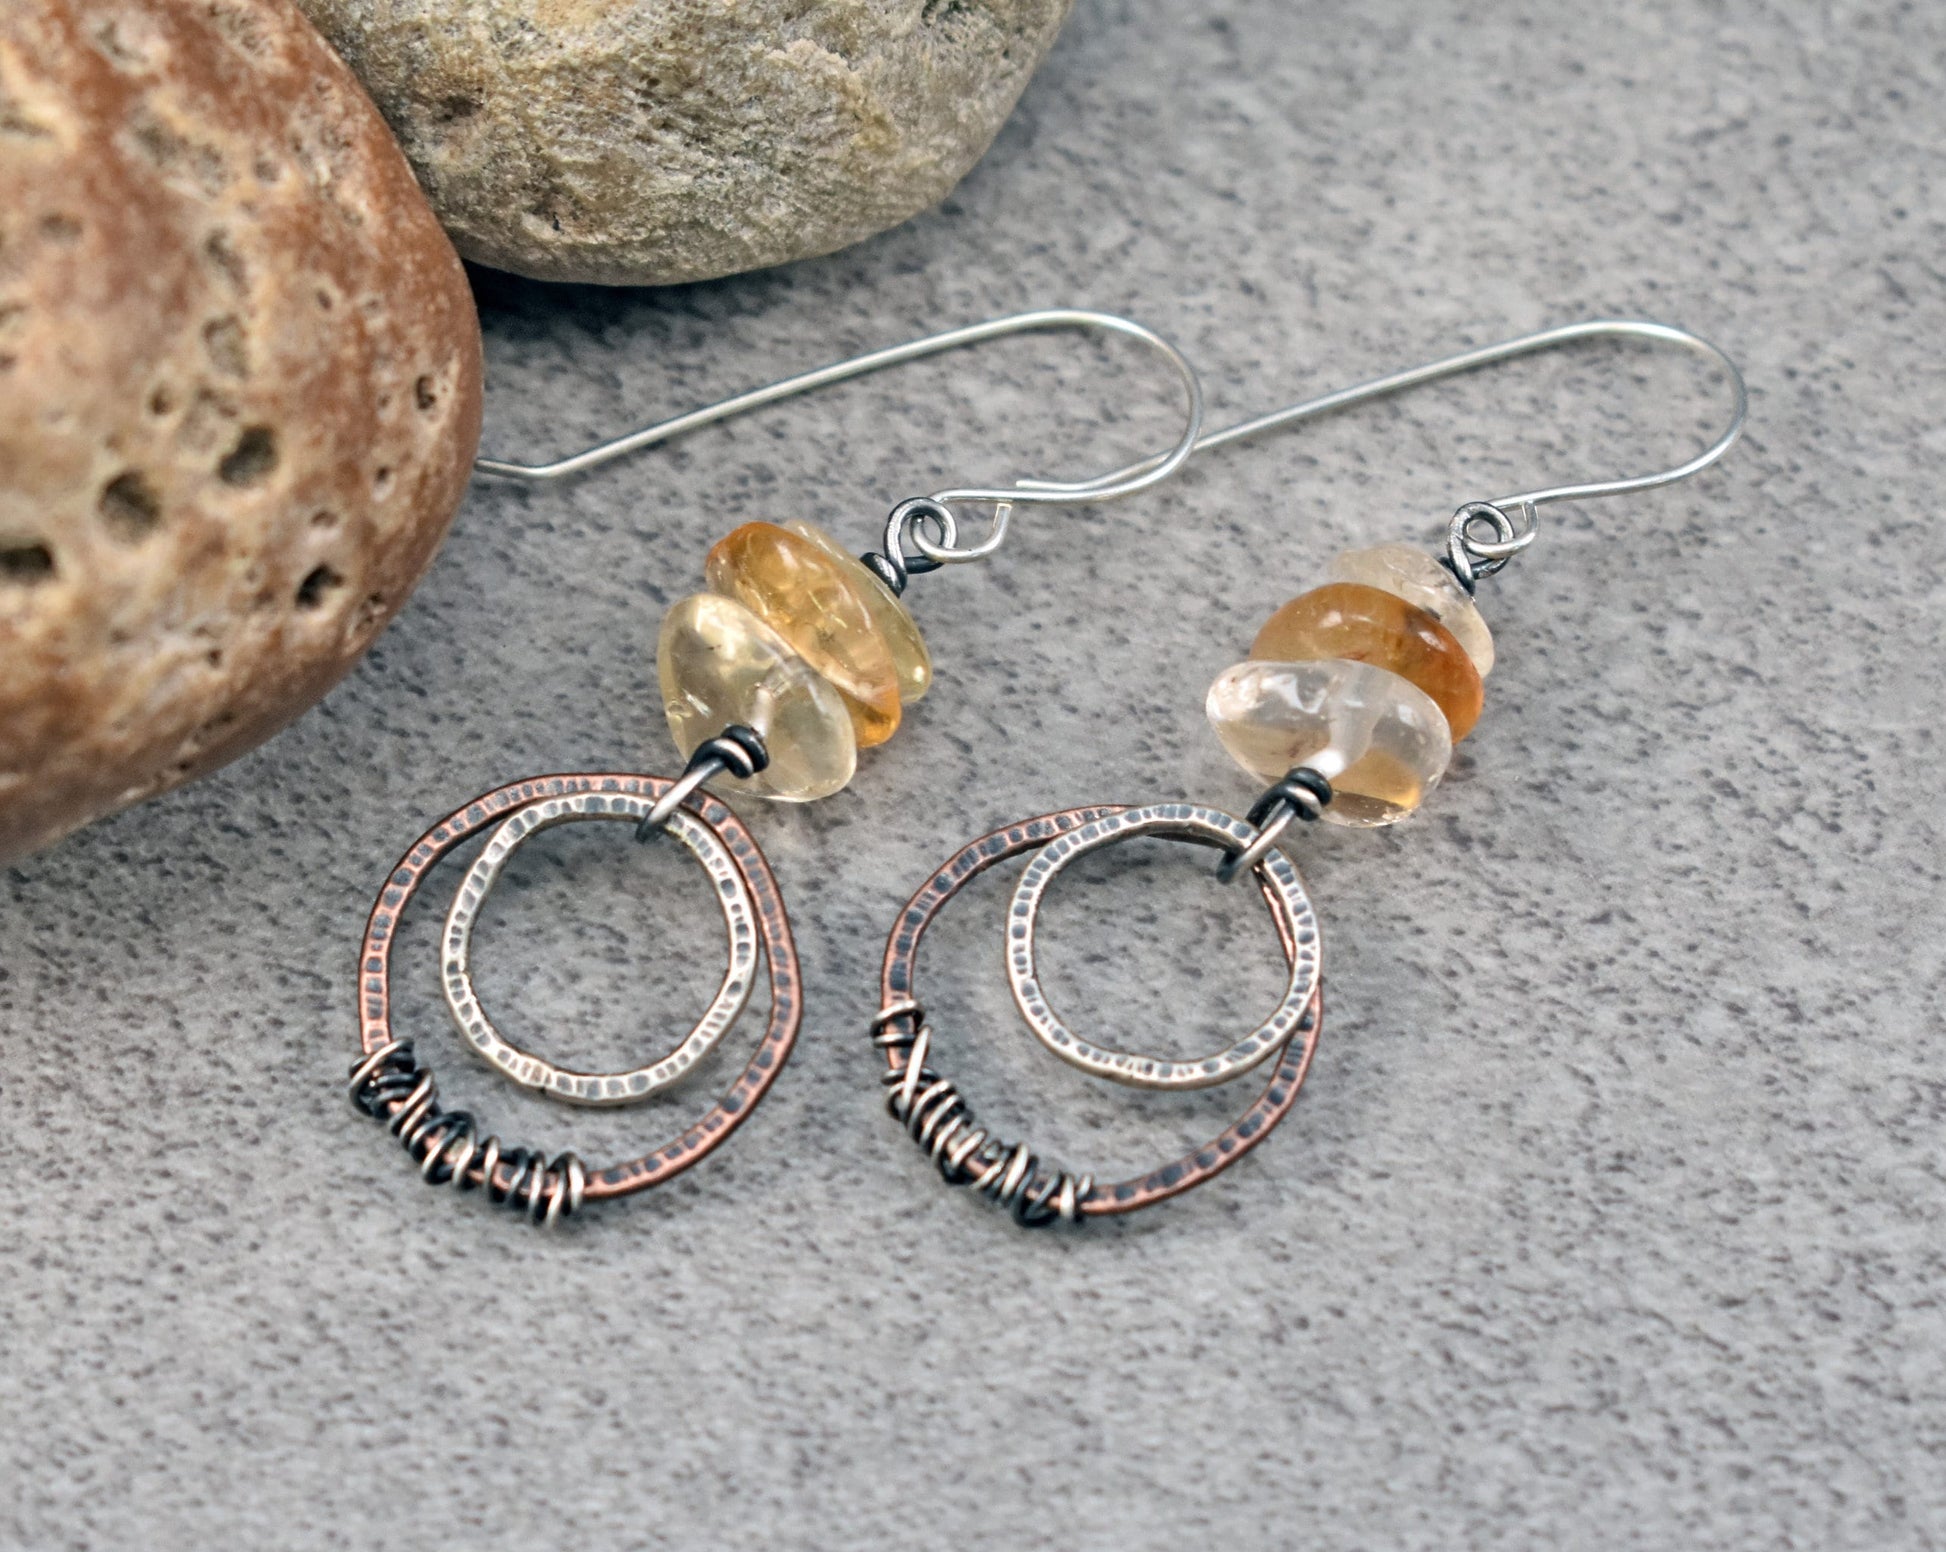 Citrine Mixed Metal Earrings, Copper Sterling Silver Circles, Yellow Crystal Dangles, Unique Rustic Gemstone Jewelry, November Birthstone